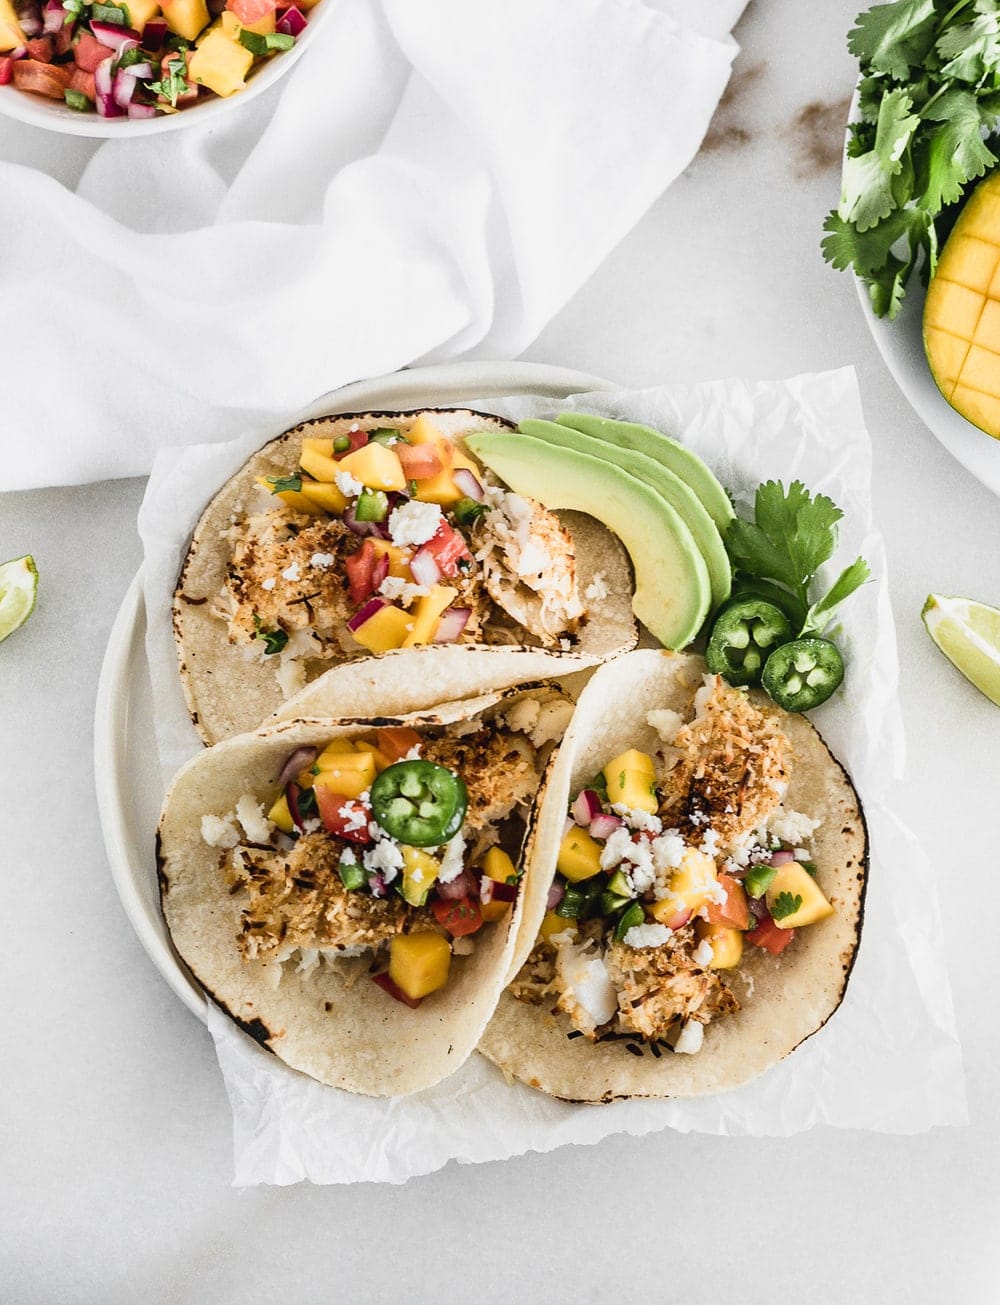 Crunchy Coconut Fish Tacos topped with a fresh mango salsa are the perfect tacos for a Cinco de Mayo fiesta or any time of year! They're baked, not fried, so you can indulge healthfully. Perfect for Cinco de Mayo! | via livelytable.com